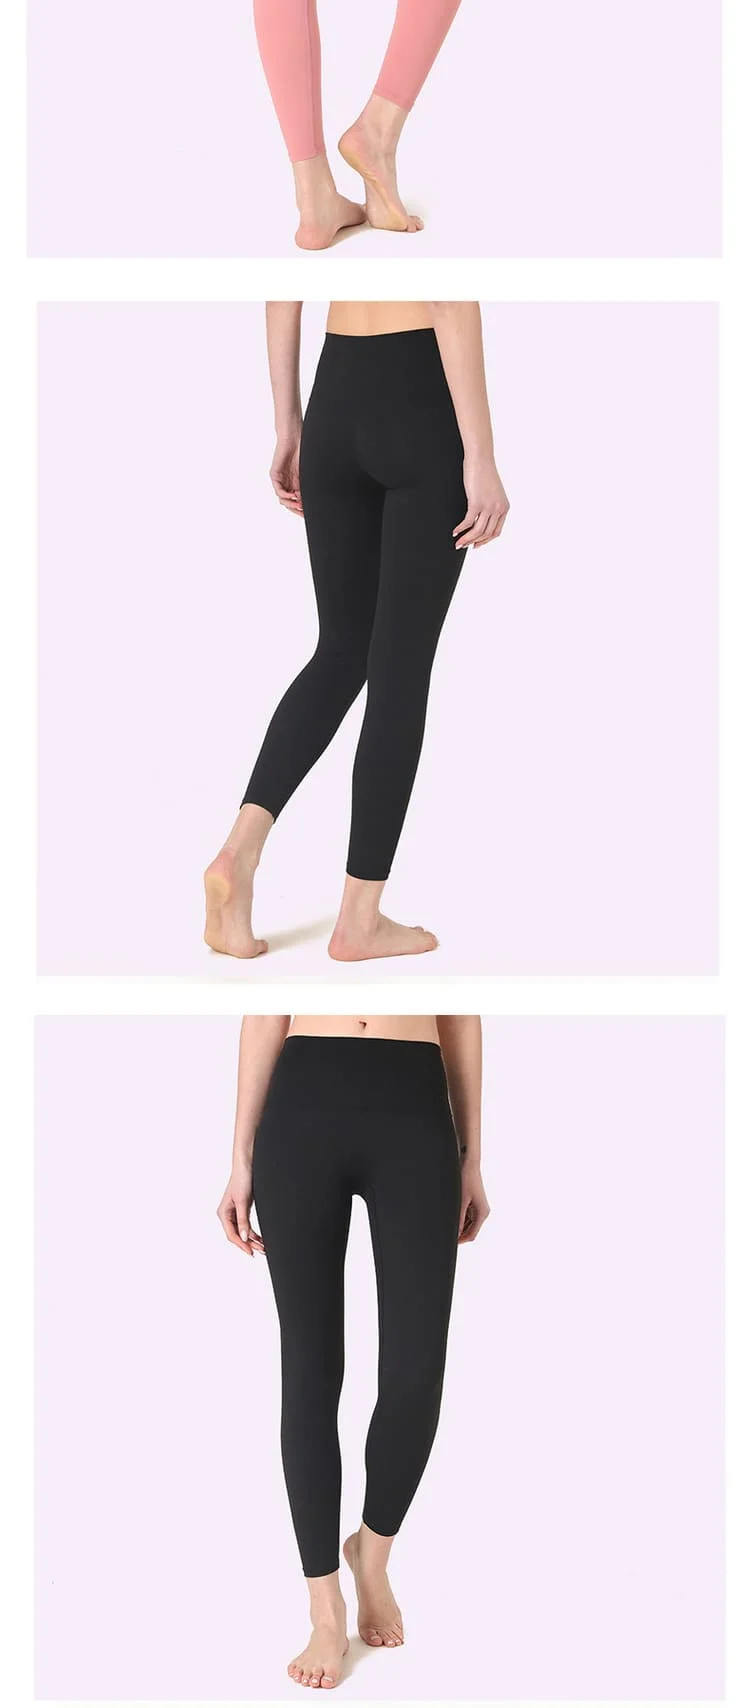 Ladies Stretchy Scrunched Sports Yoga Workout Leggings